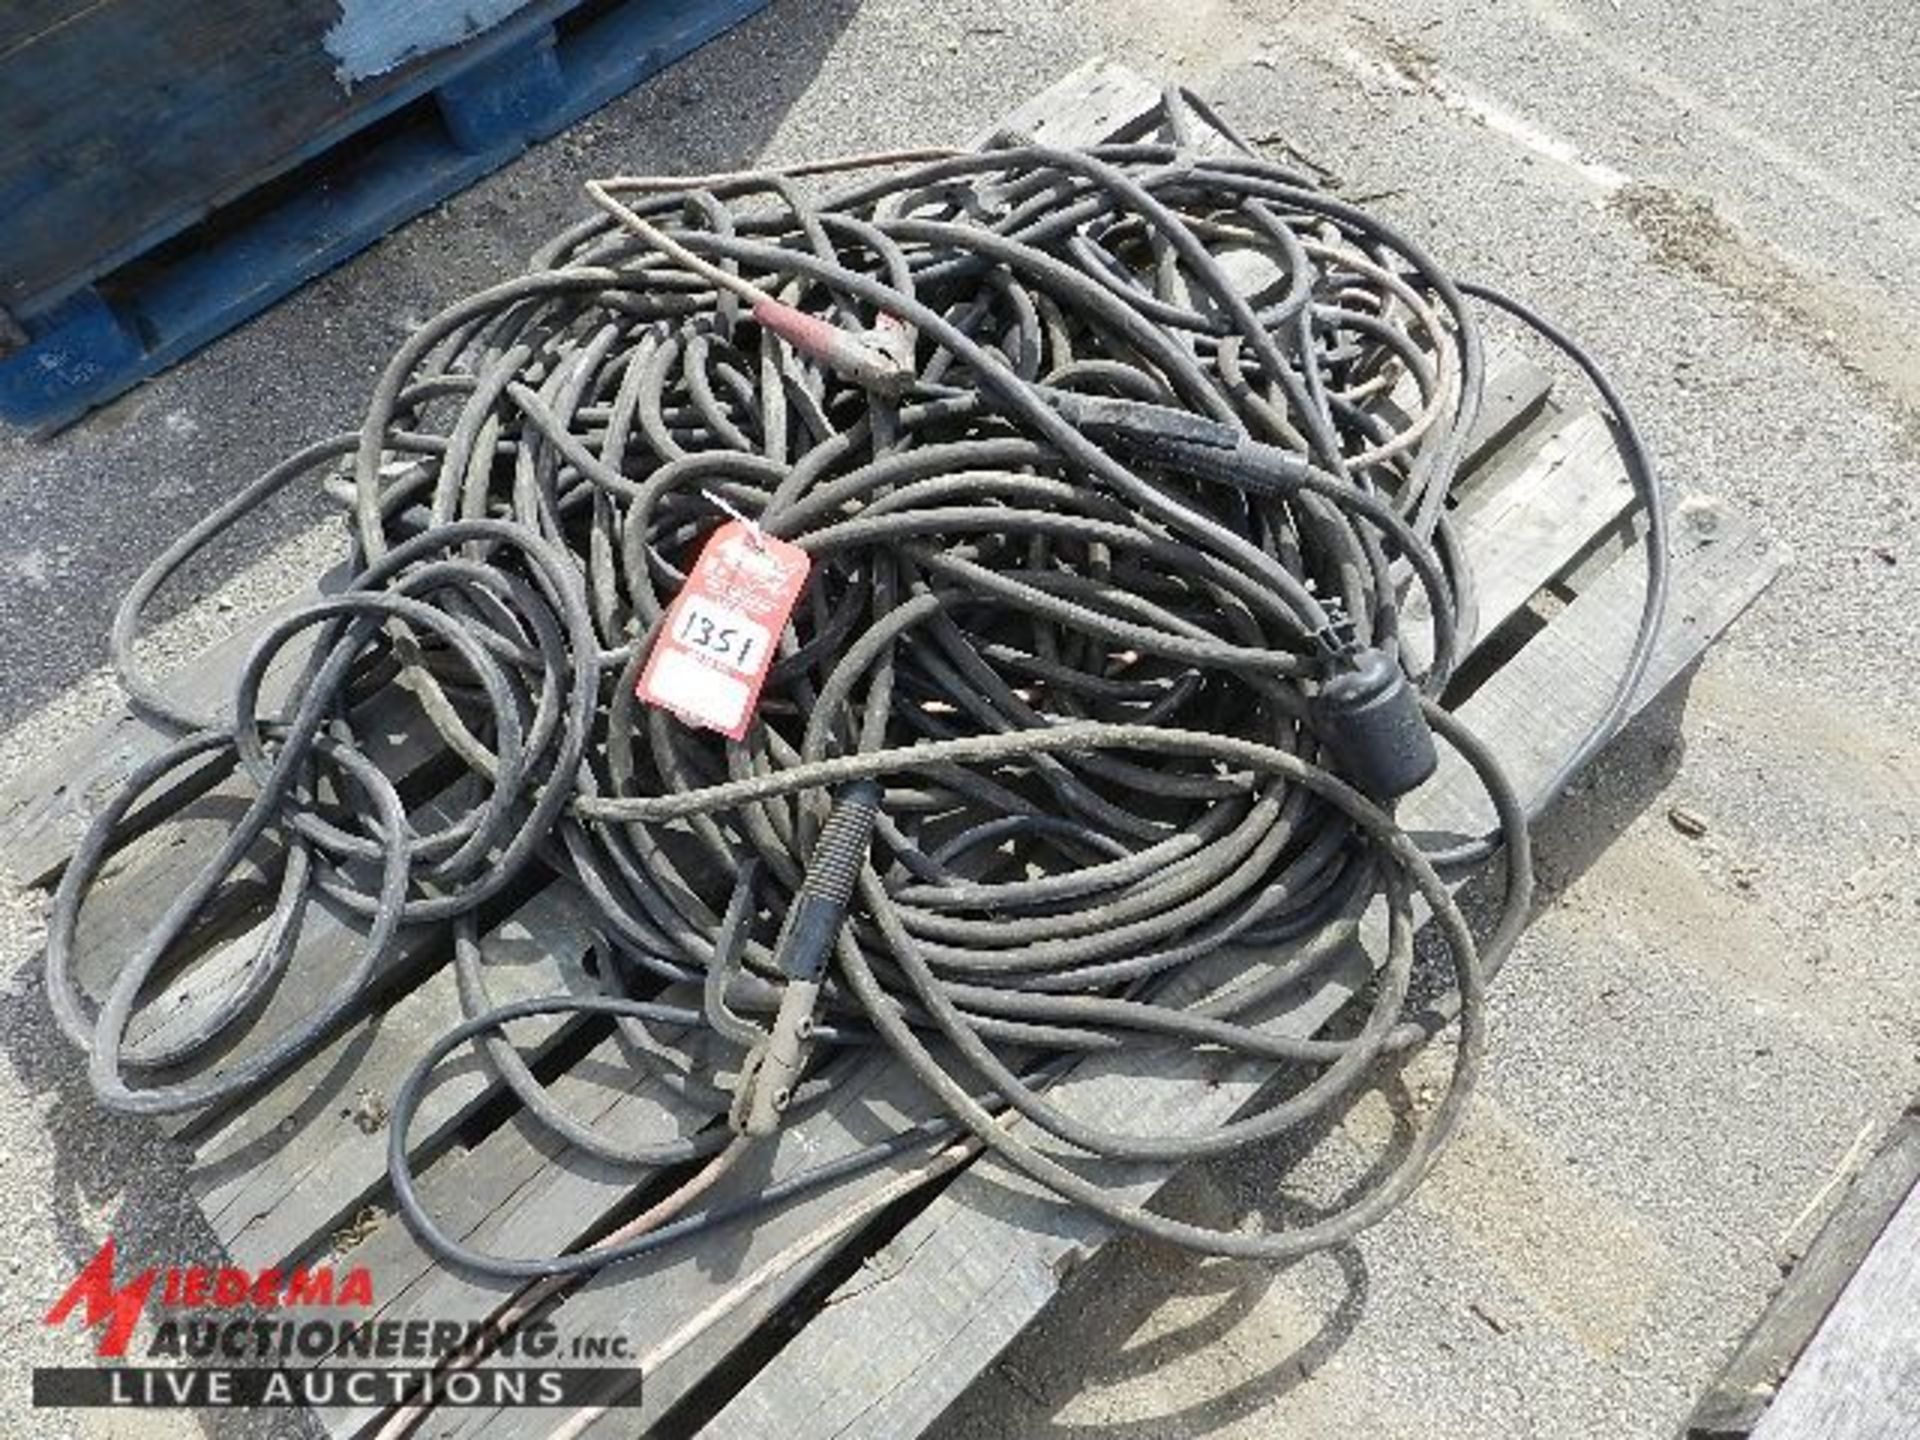 SKID OF ASSORTED WIRE, WELDING WIRE, JUMPER CABLES AND MORE - Image 2 of 2